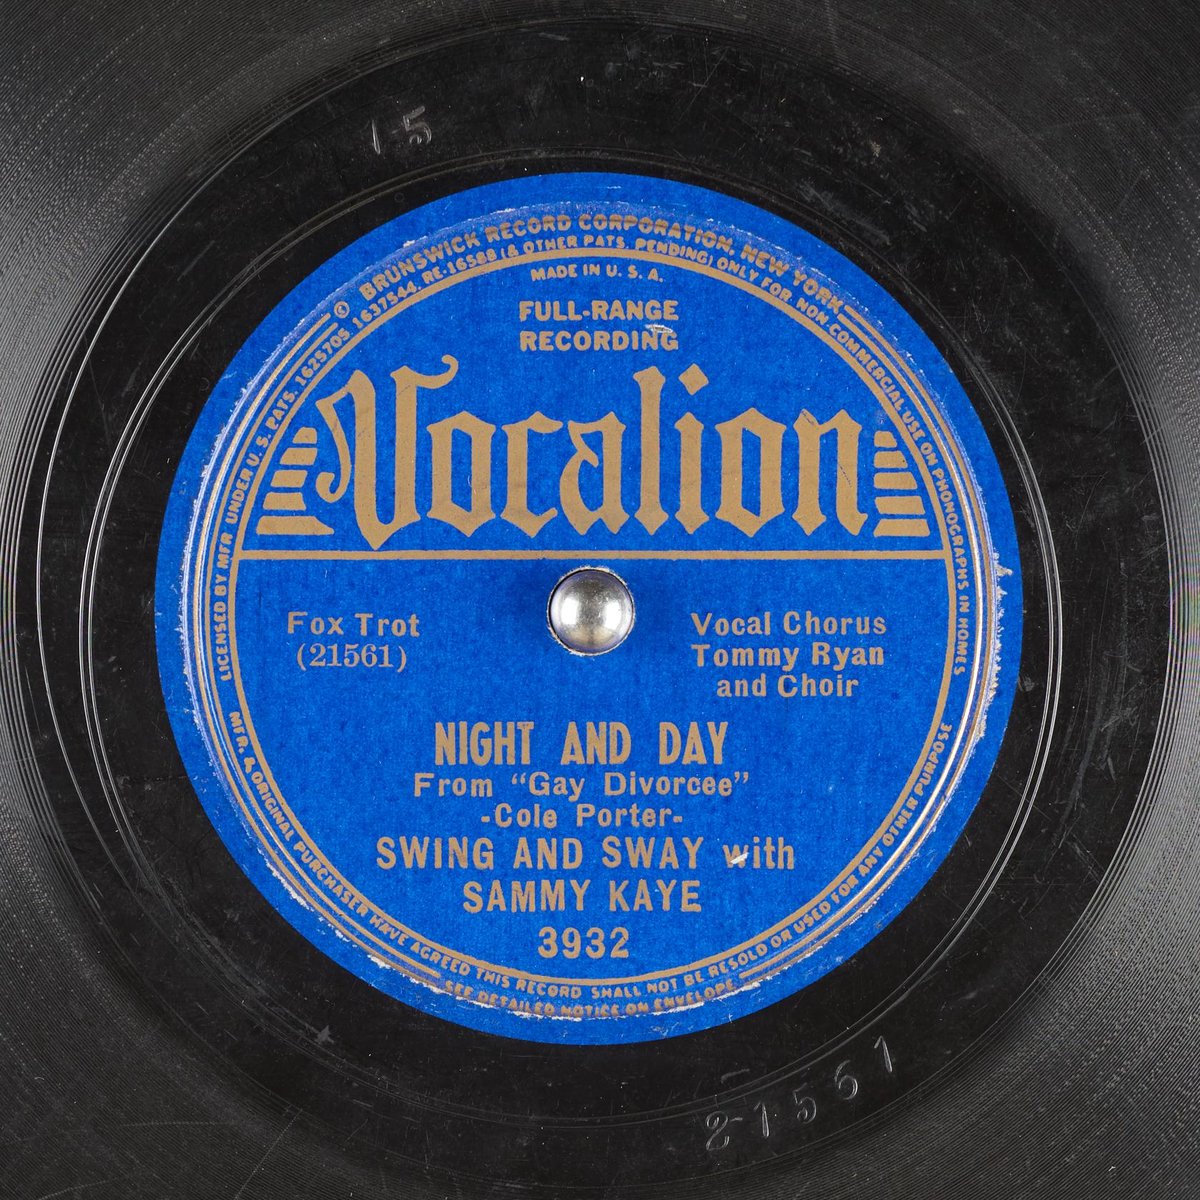 78_night-and-day_swing-and-sway-with-sammy-kaye-tommy-ryan-cole-